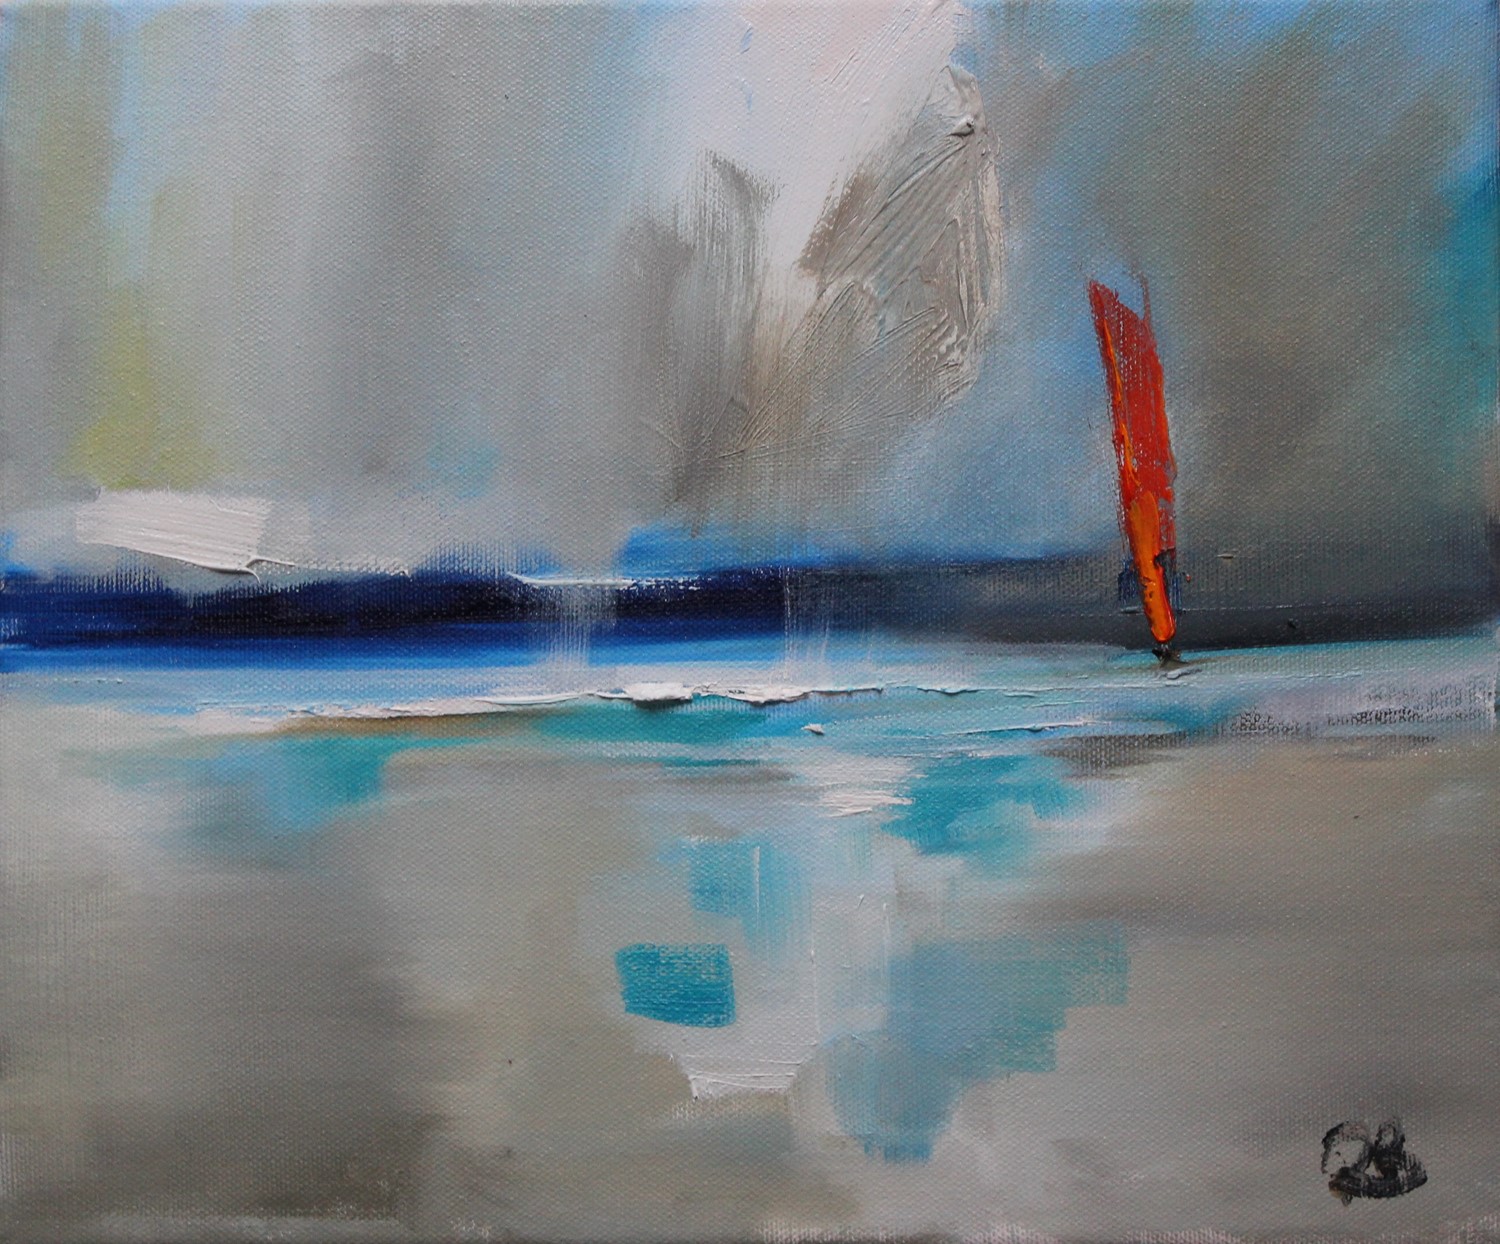 'Single Sail in the Storm' by artist Rosanne Barr